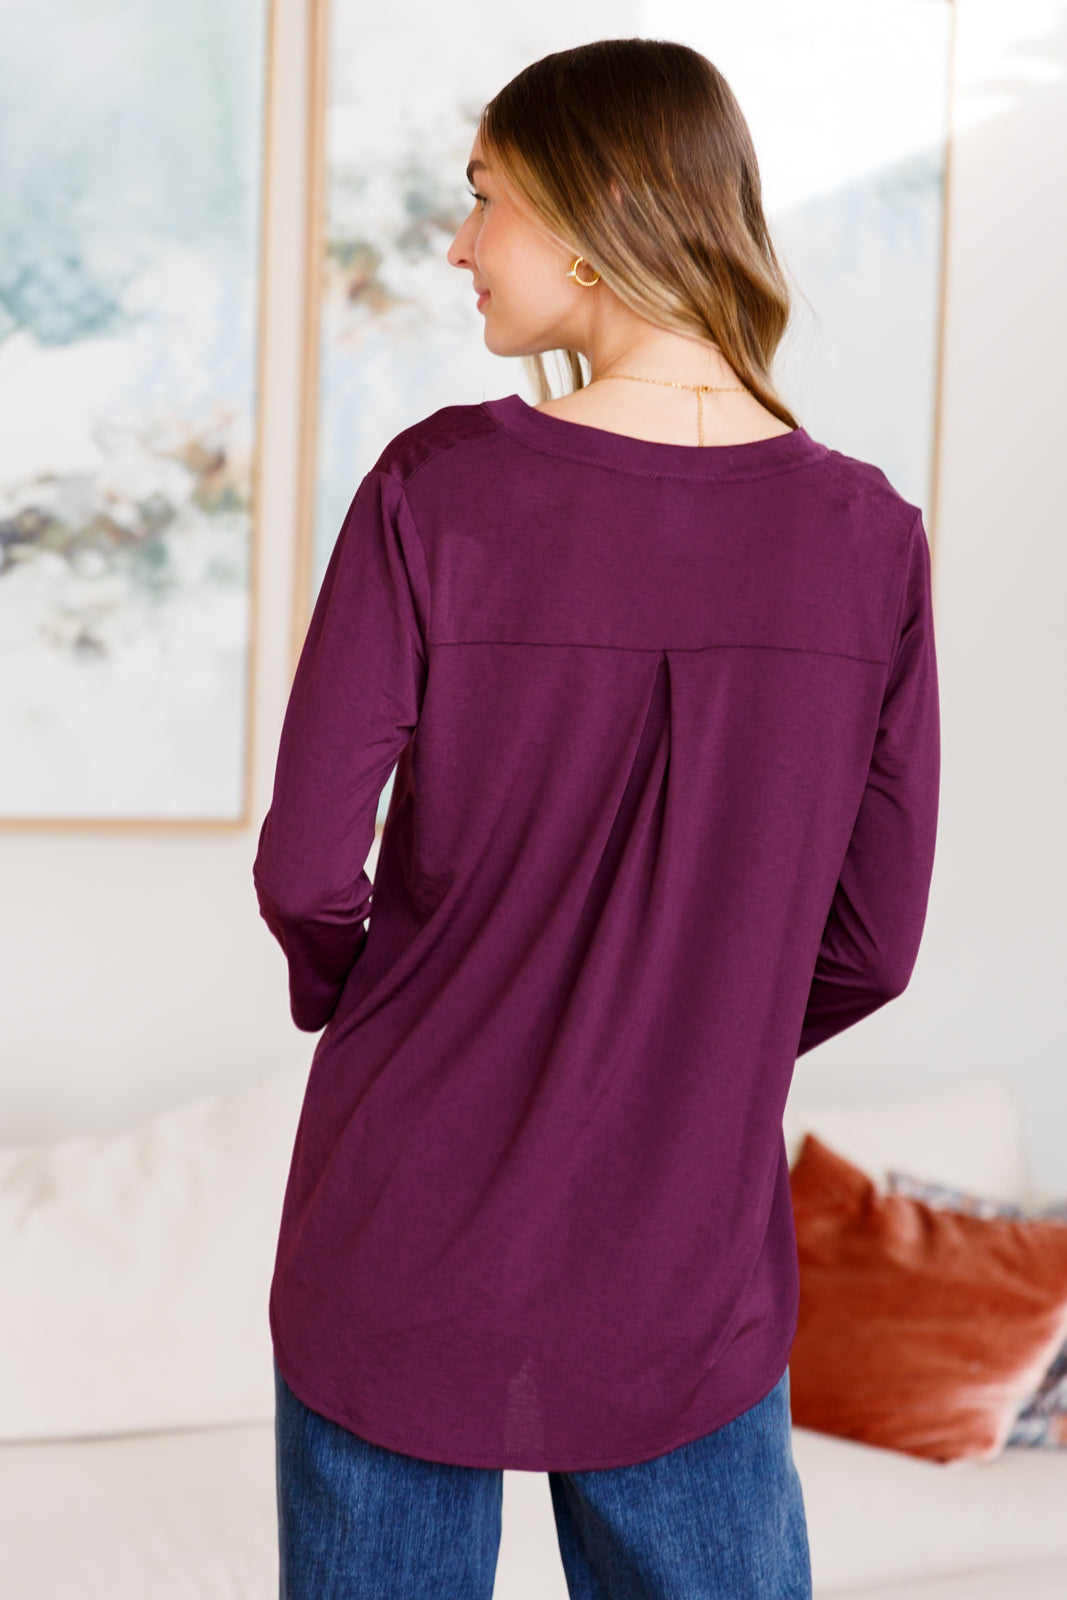 So Outstanding Top in Dark Magenta Tops Southern Soul Collectives